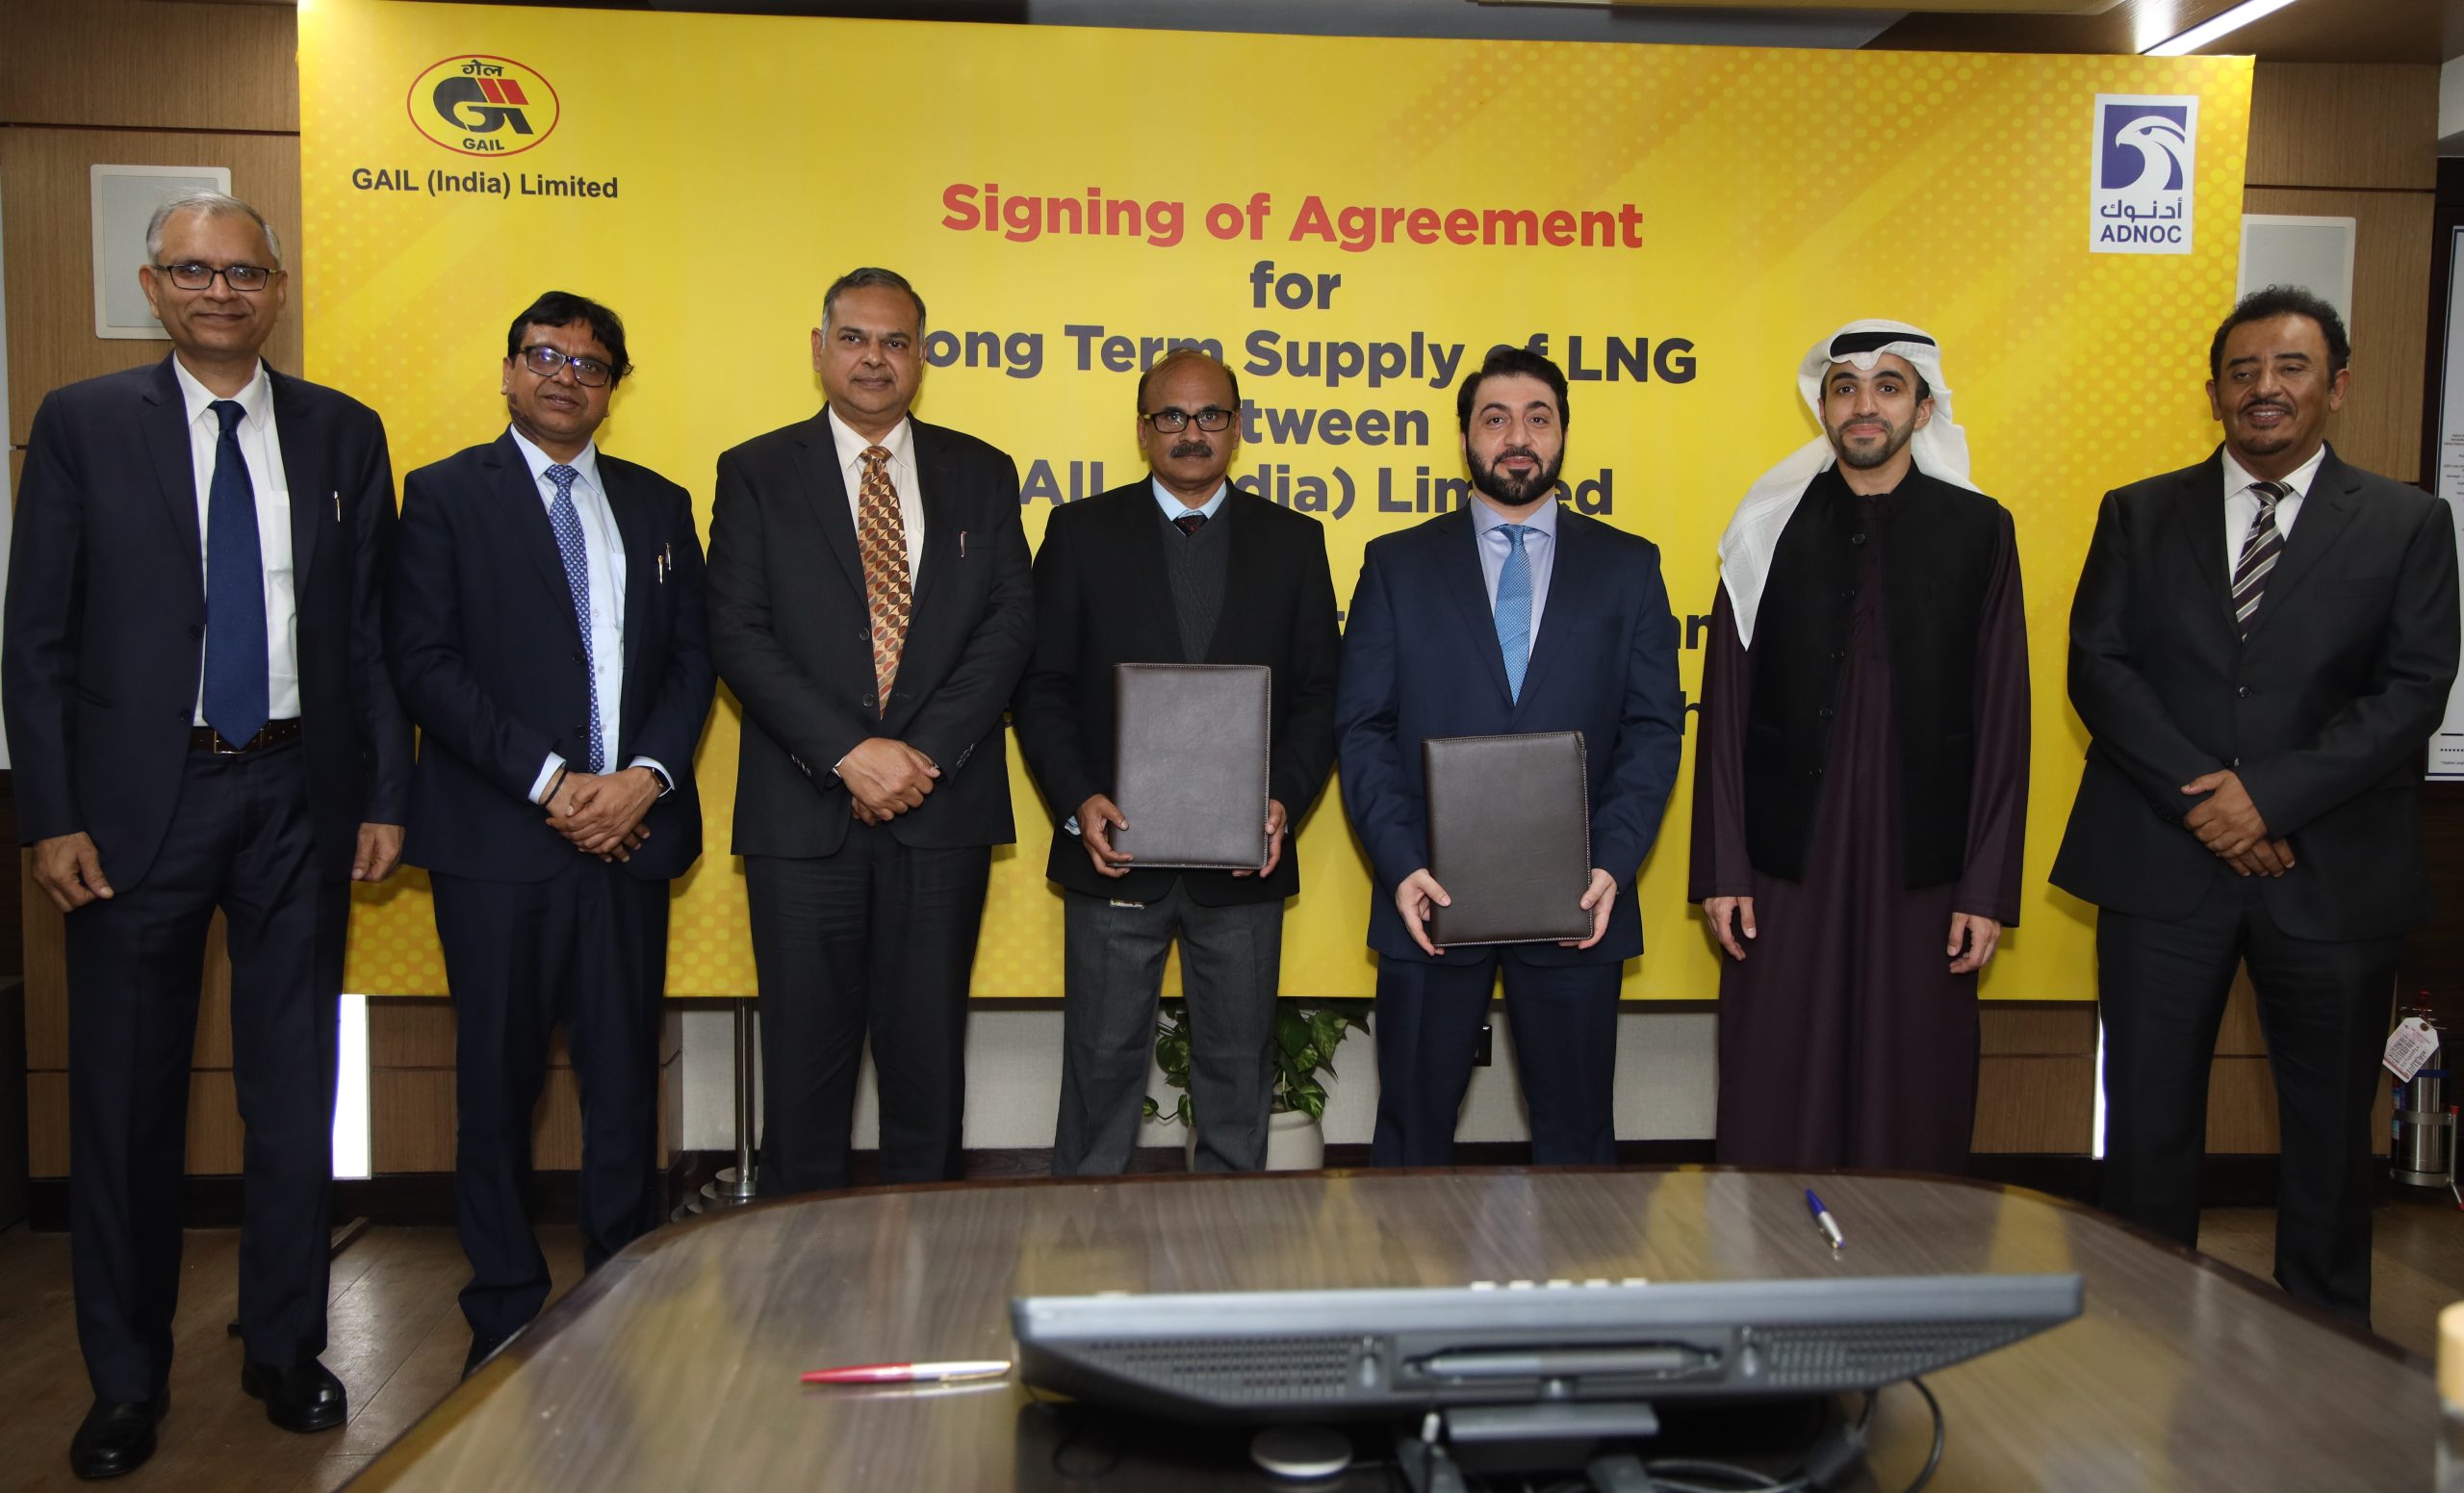 GAIL And ADNOC Gas Ink A Long-Term LNG Contract Fuelling India’s Natural Gas Industry Growth